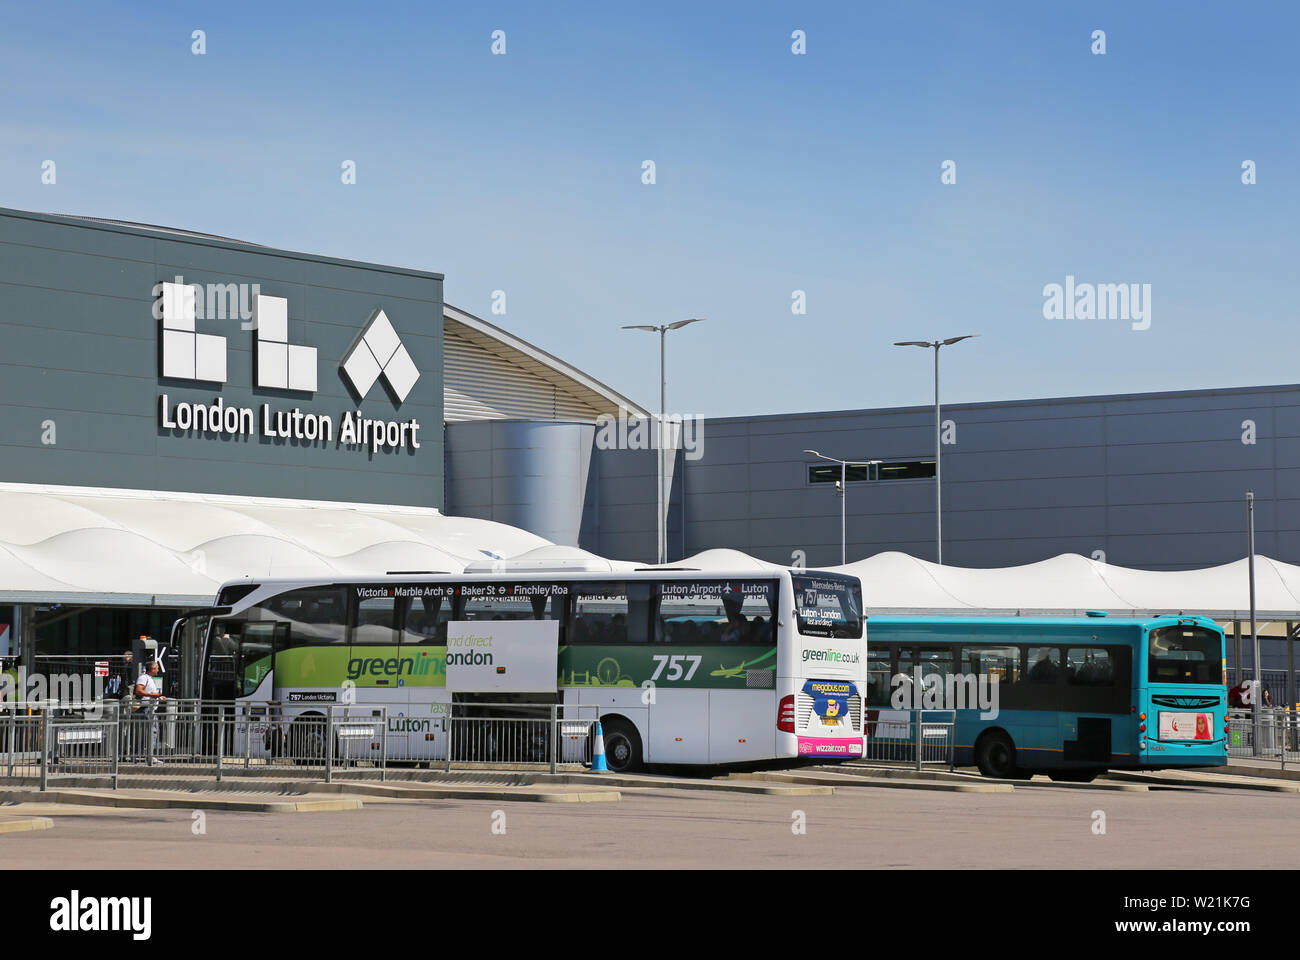 Luton Airport, London. Passenger drop-off area and bus station in front of the main terminal building - featuring new Logo (summer 2019) Stock Photo